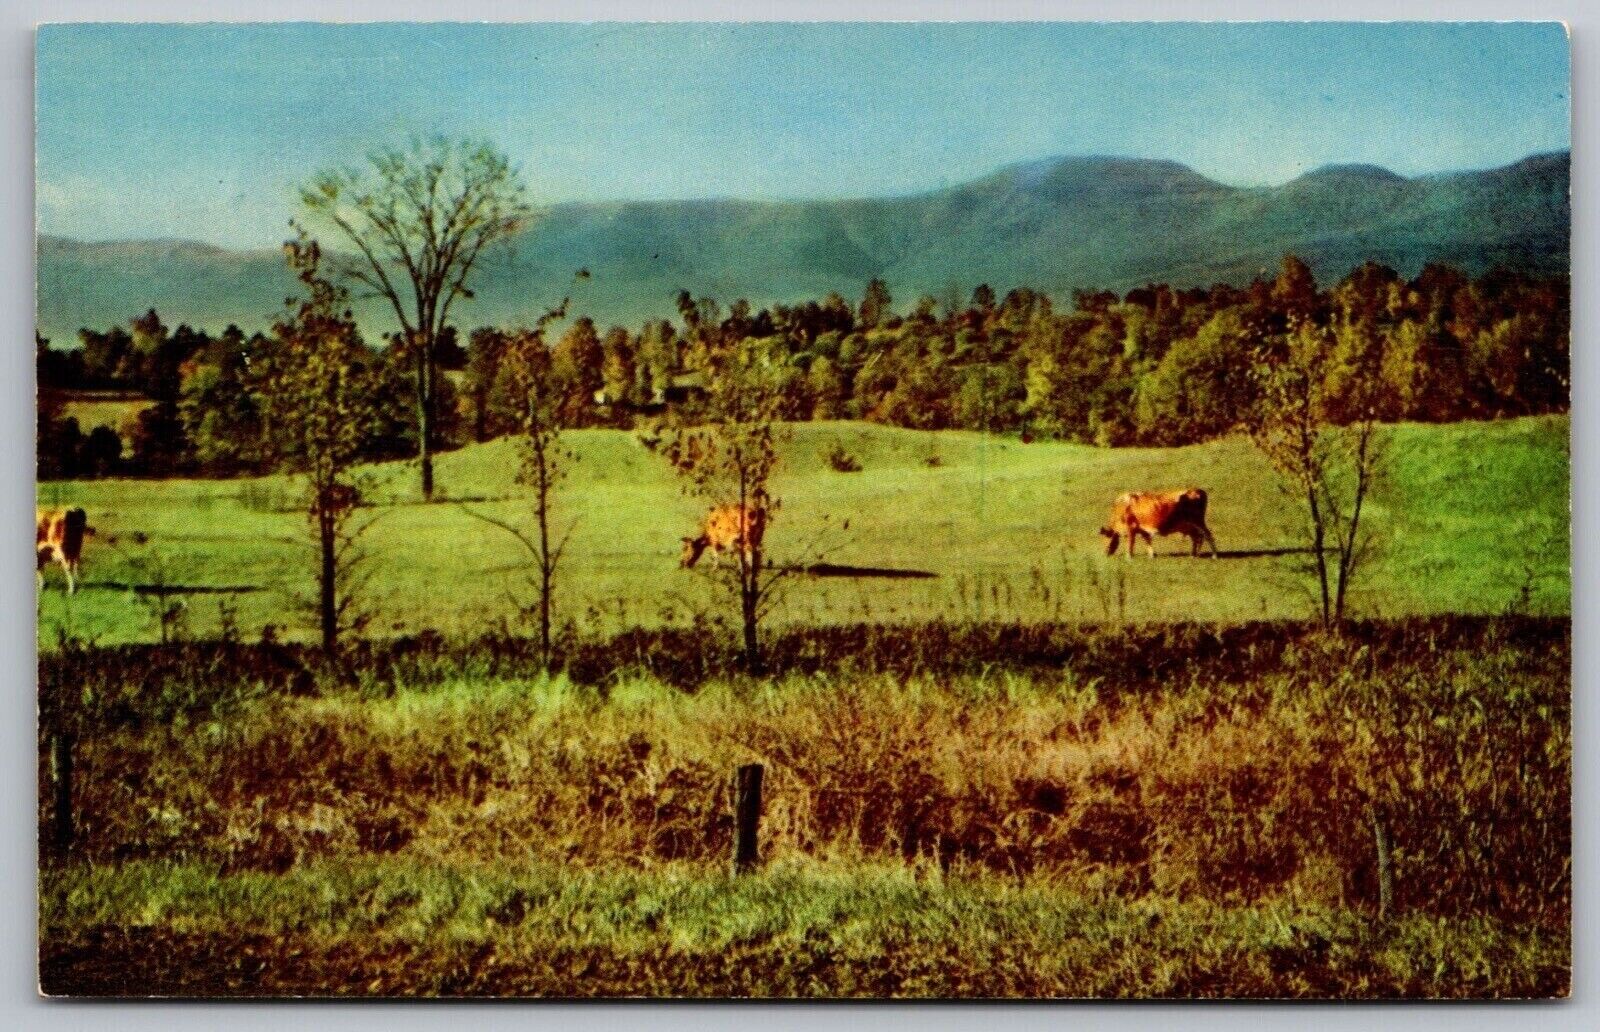 Catskill Blackhead Mountains New York Cattle Cows Field Forest Vintage Postcard